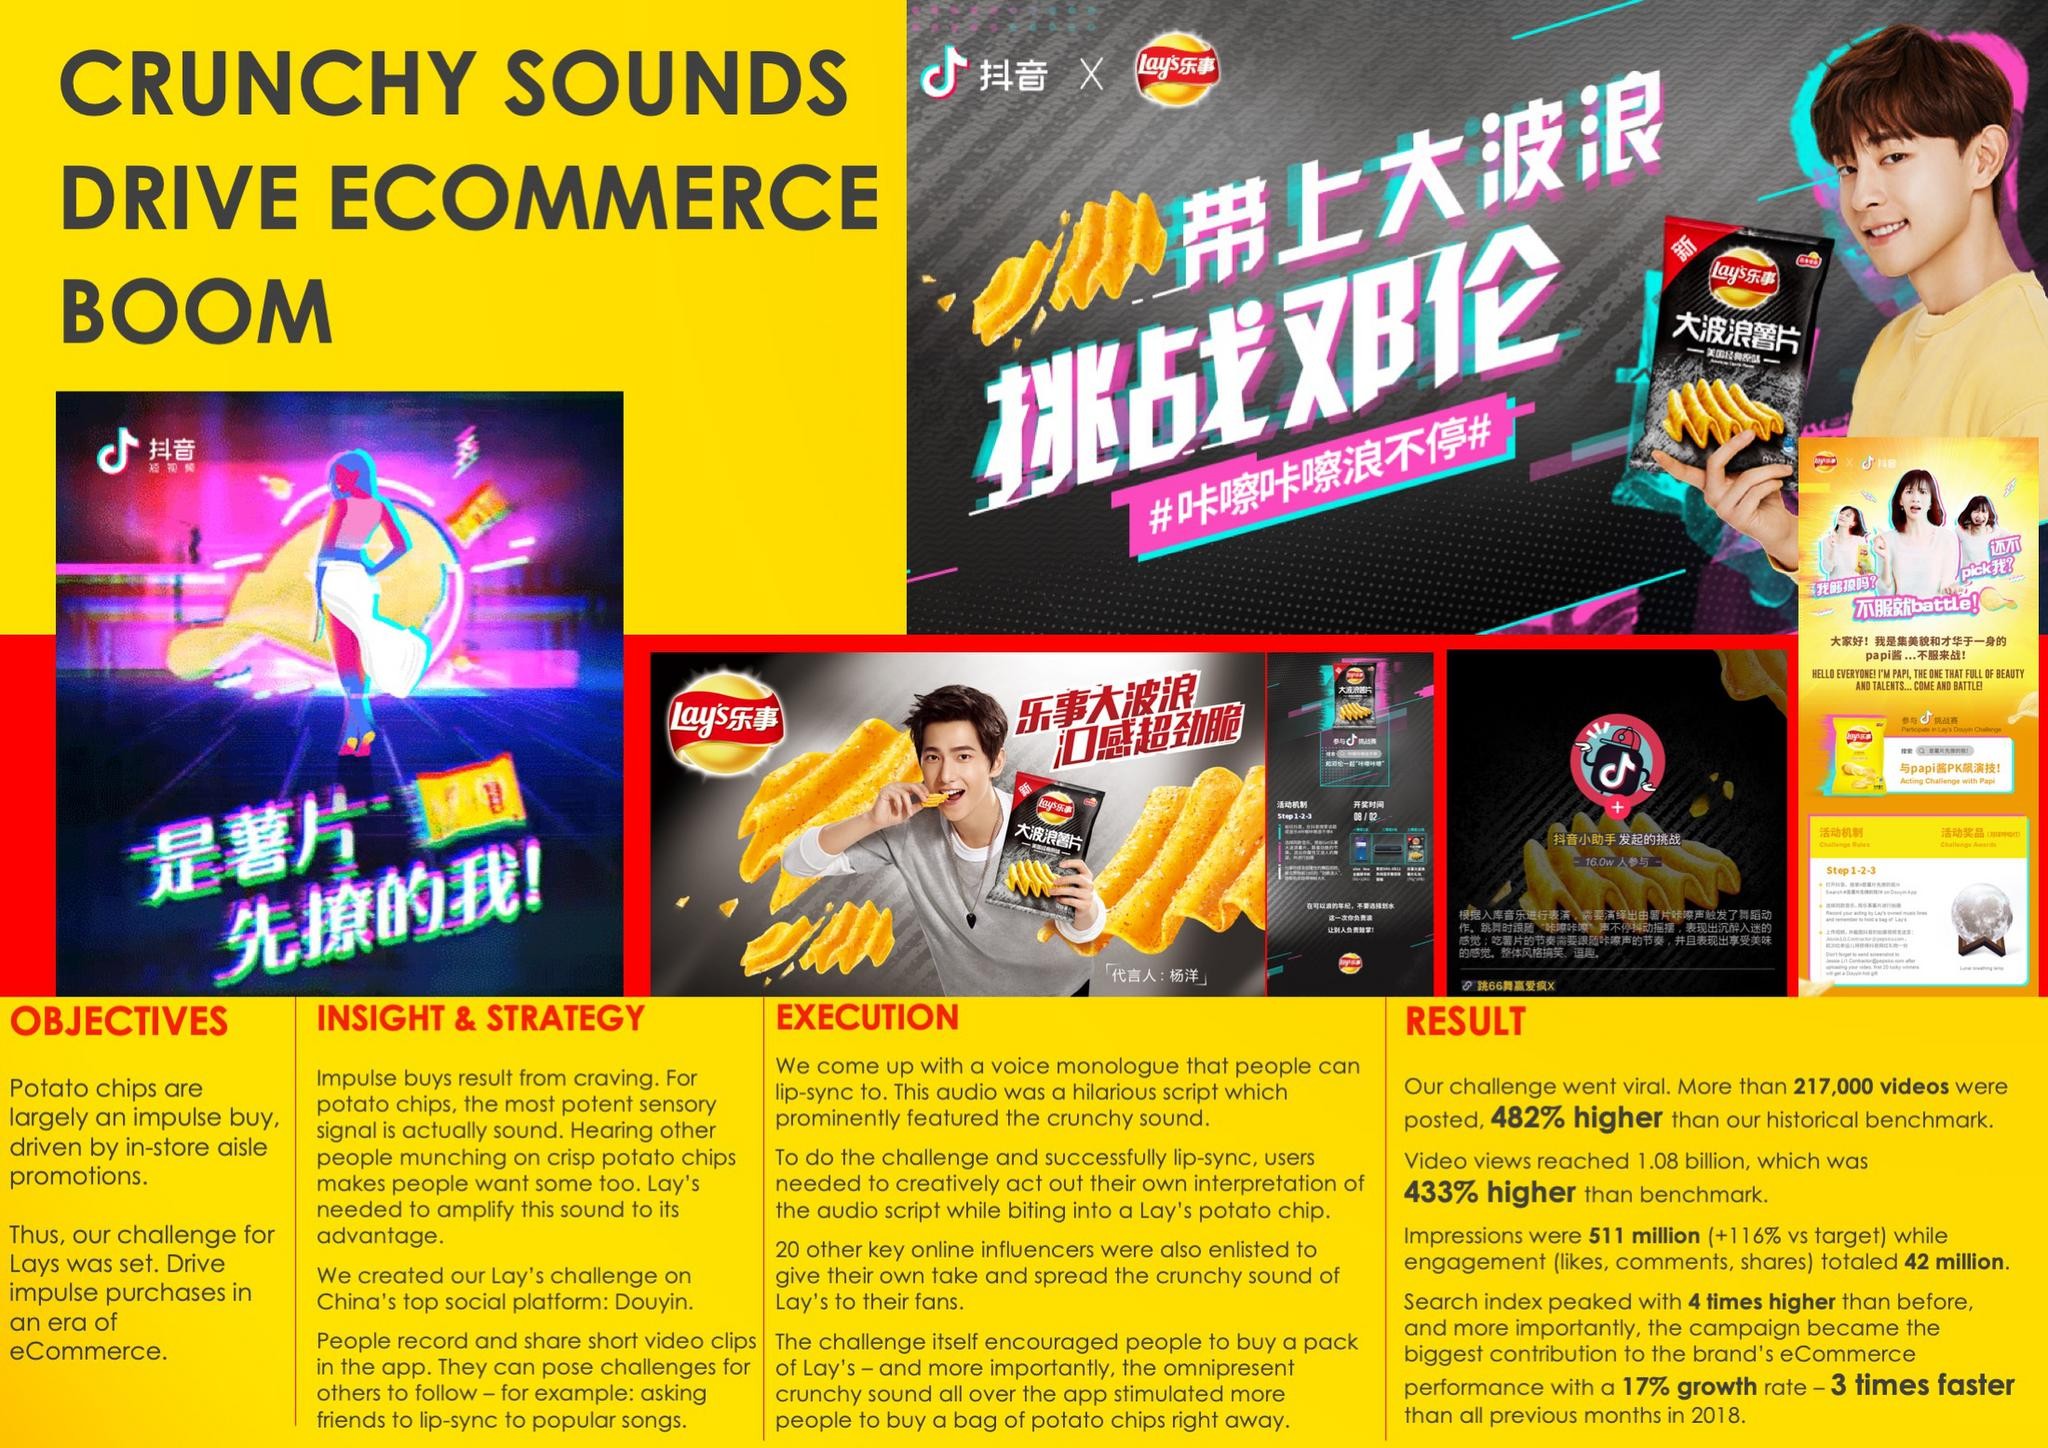 Crunchy Sounds Drive eCommerce Boom